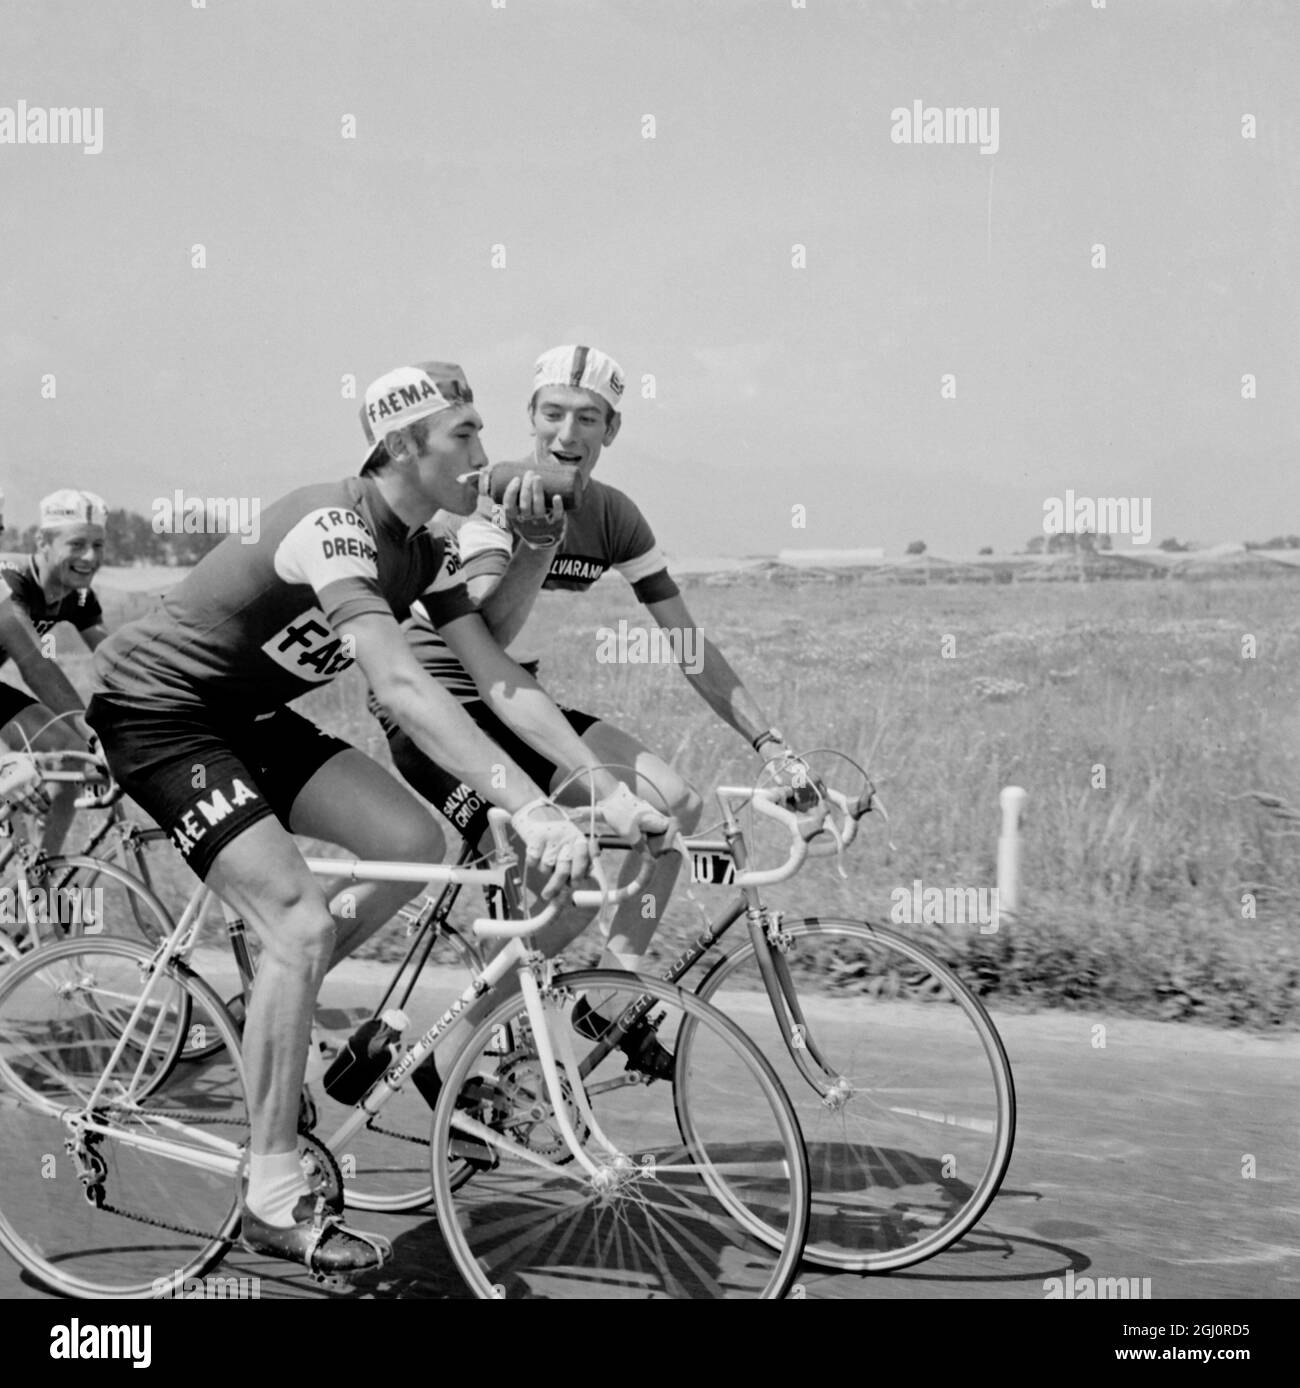 Silvano Marina , Italy : Felice Gimondi gives a drink of water to Belgium 's cycling ace Eddy Merckx during the 12th lap of the Tour of Italy ( Giro d'Italia ) cycle race , 27 May 1969 Stock Photo